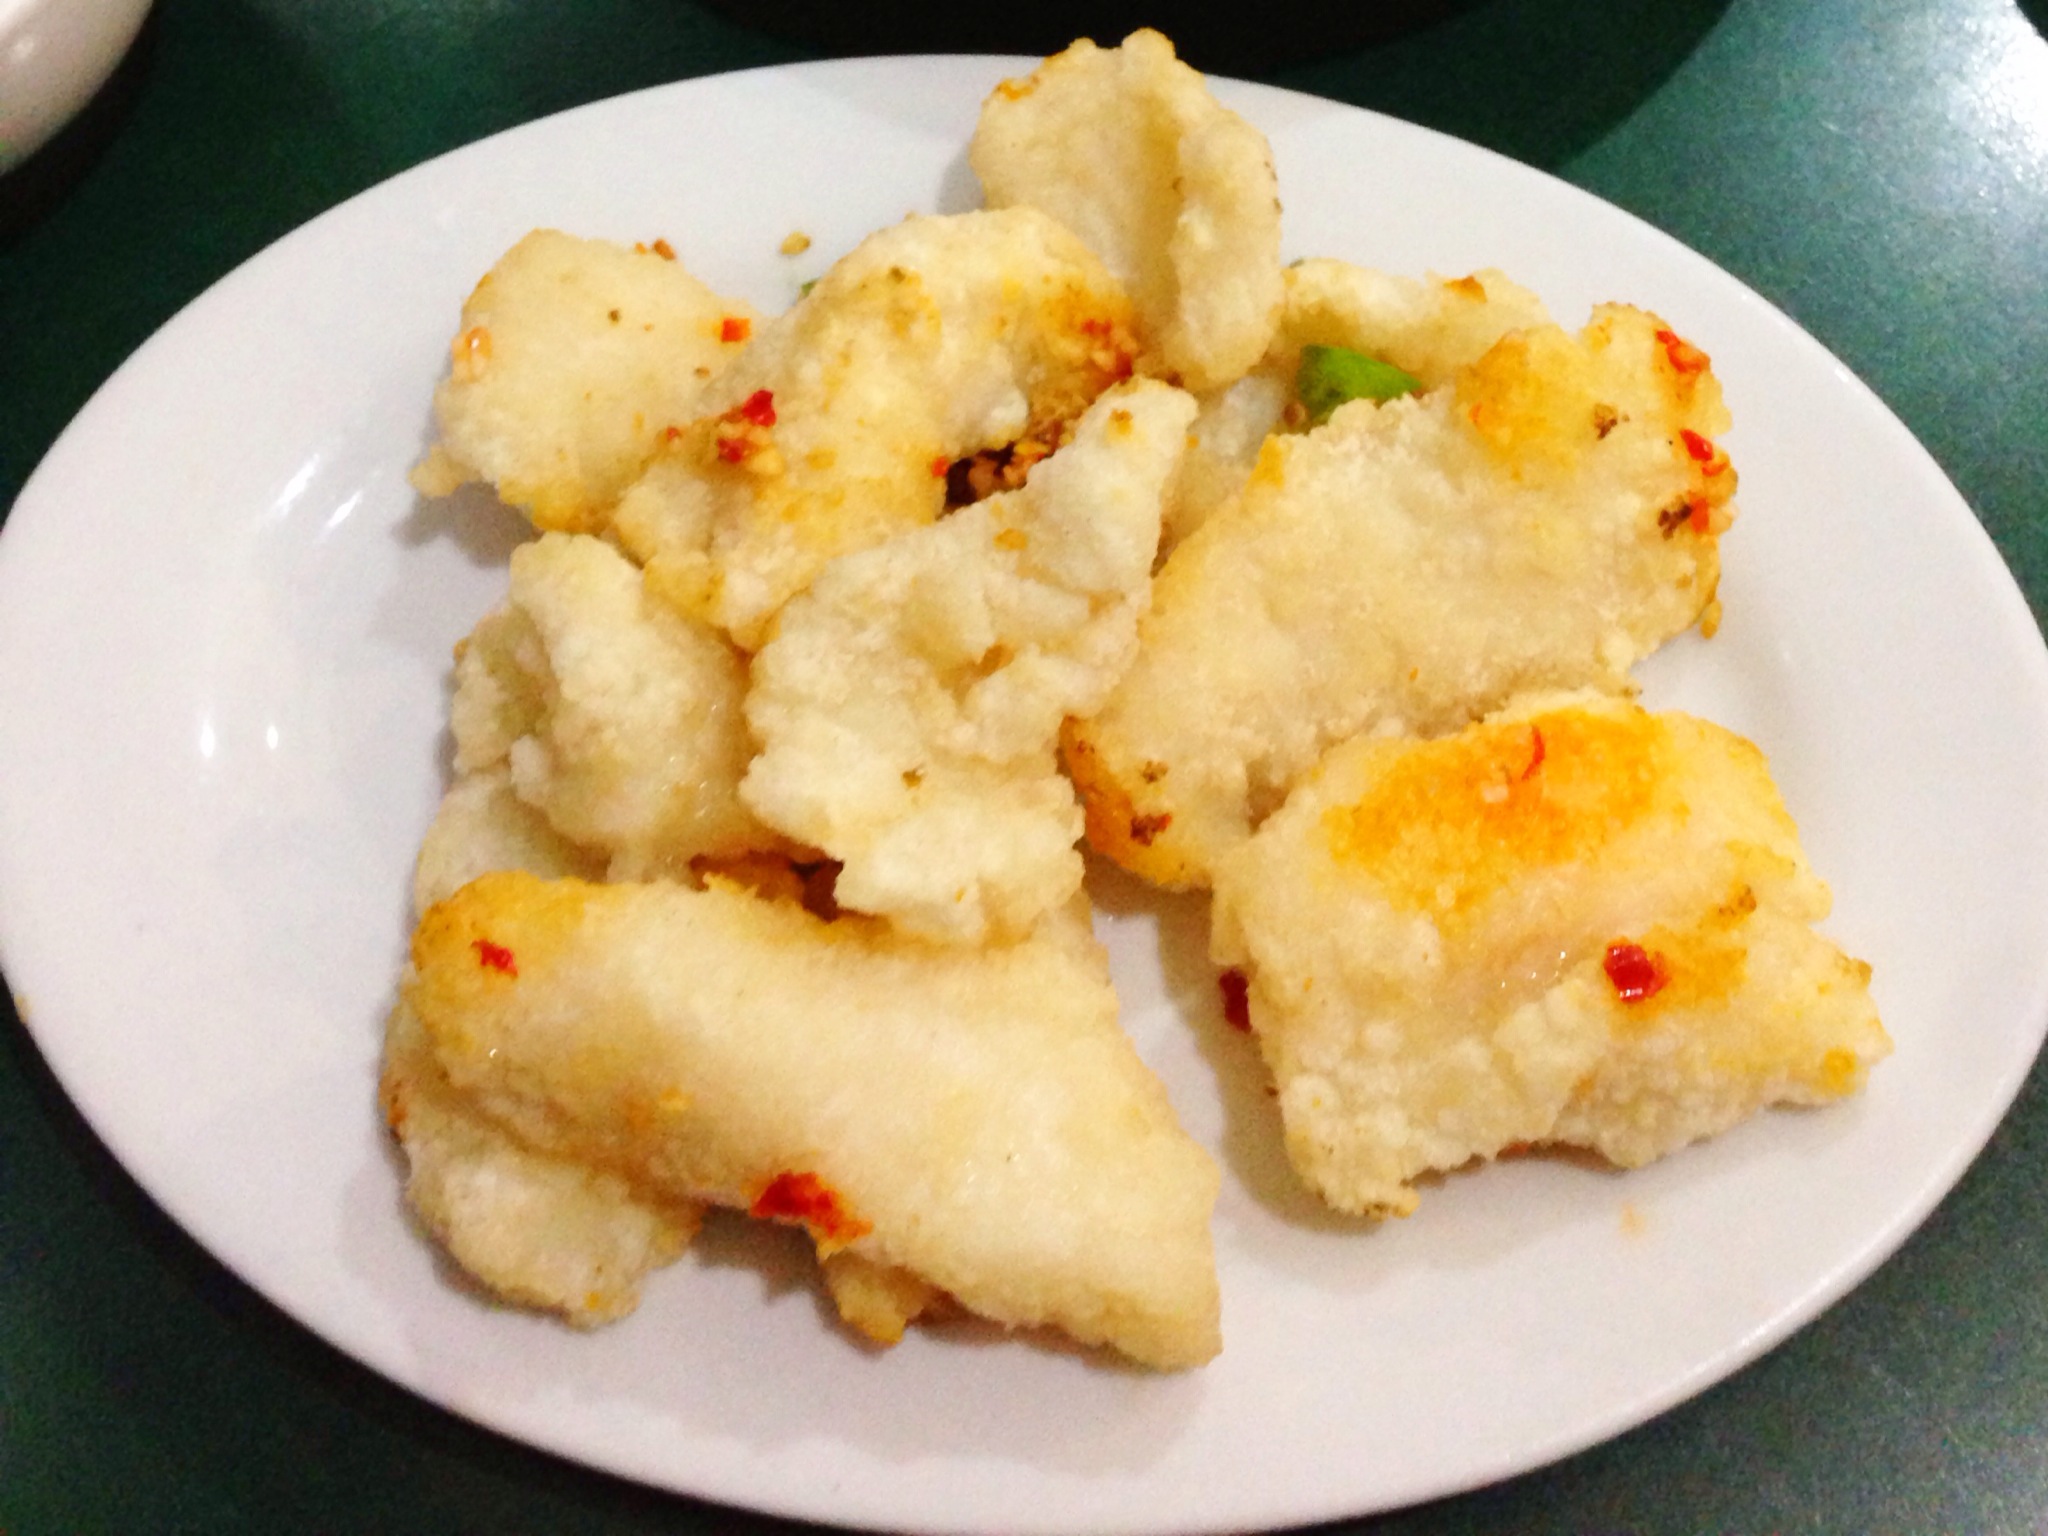 Salt and Chilli Fried Sole